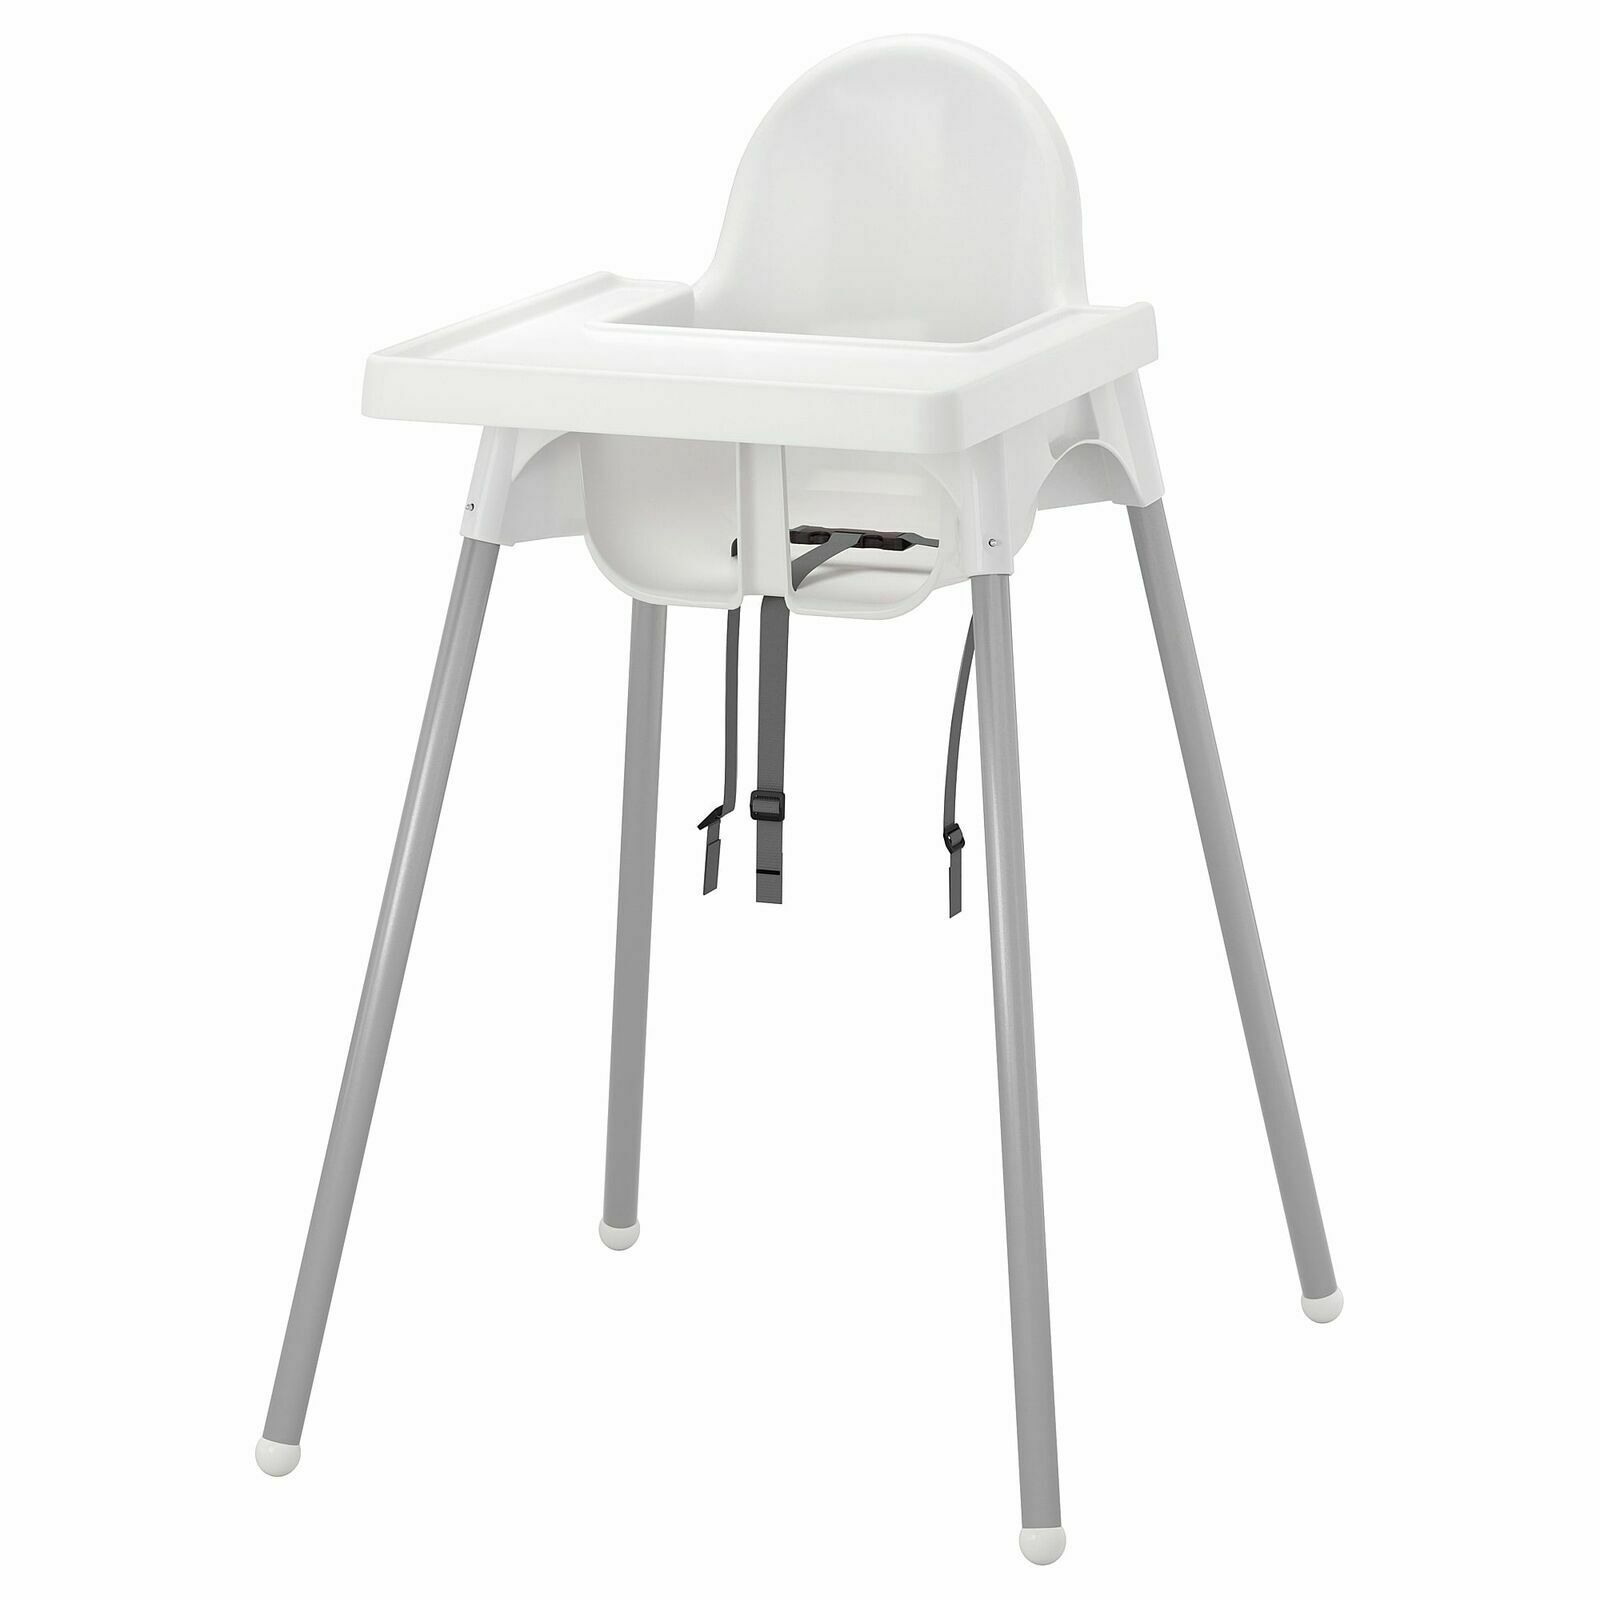 Antilop High Chair With Tray, White/silver - Brand New